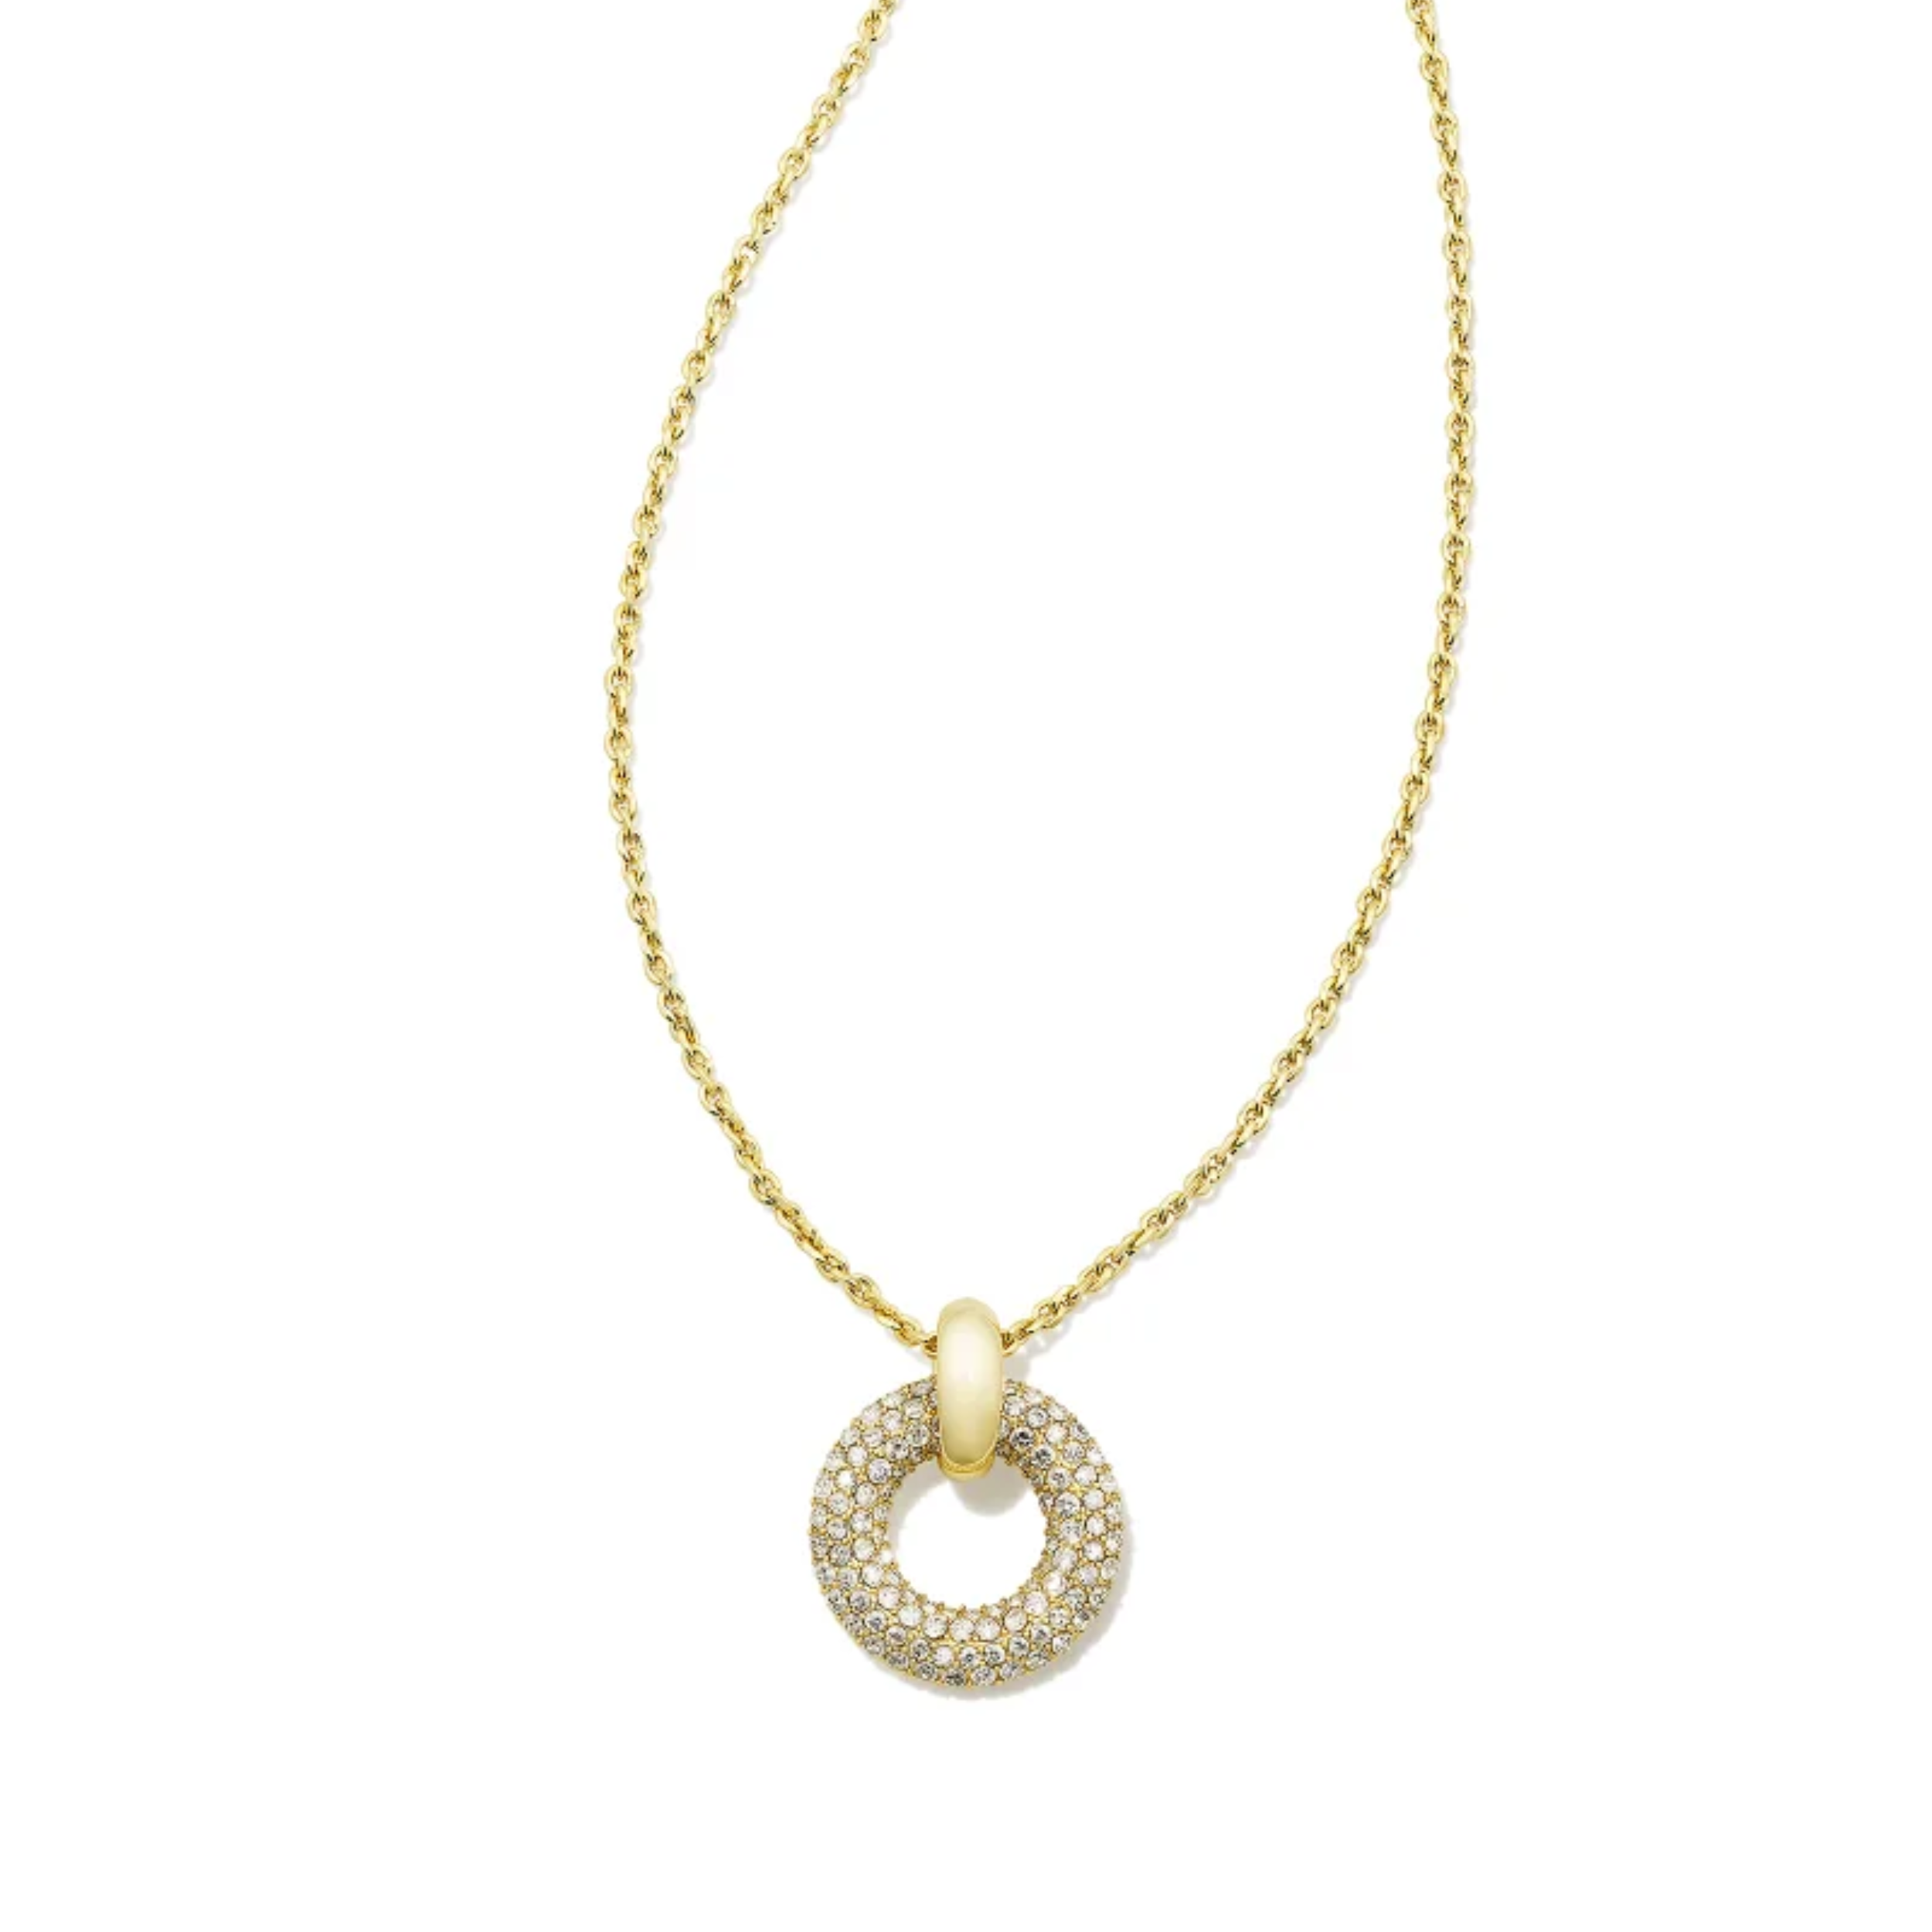 This Mikki Gold Pave Pendant Necklace in White  by Kendra Scott is pictured on a white background.